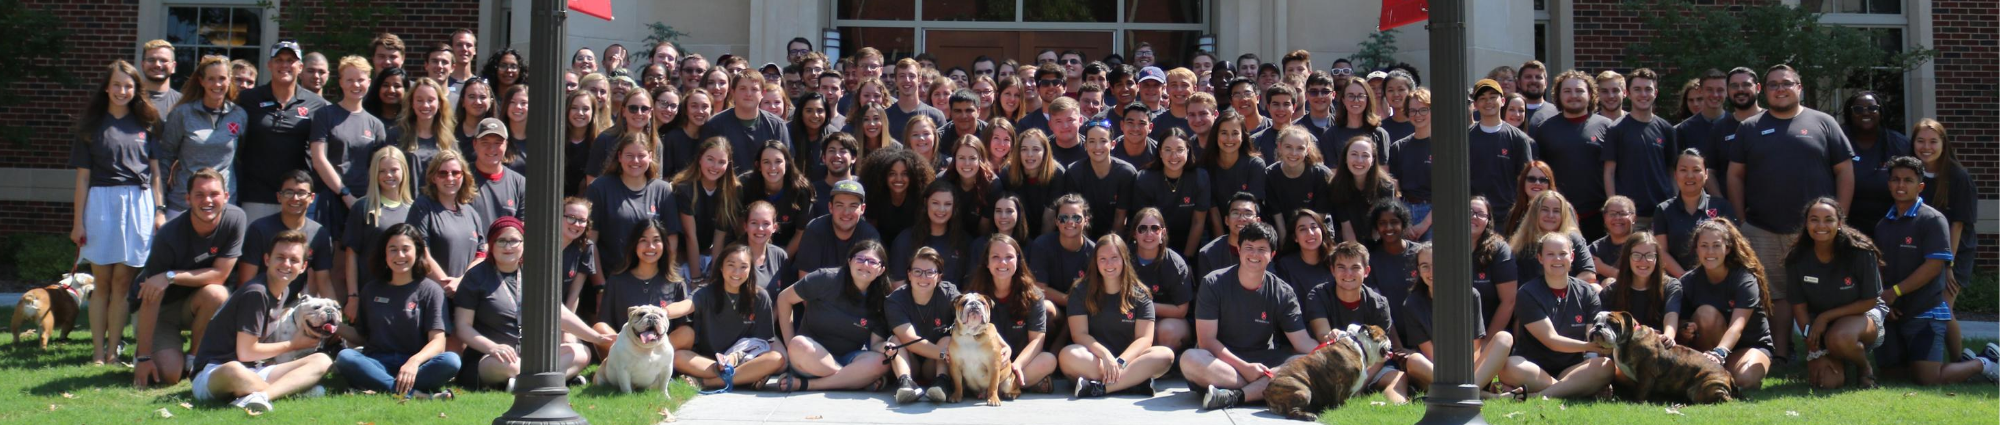 Group picture of 2019 Headington Residential College residents, faculty, and staff.